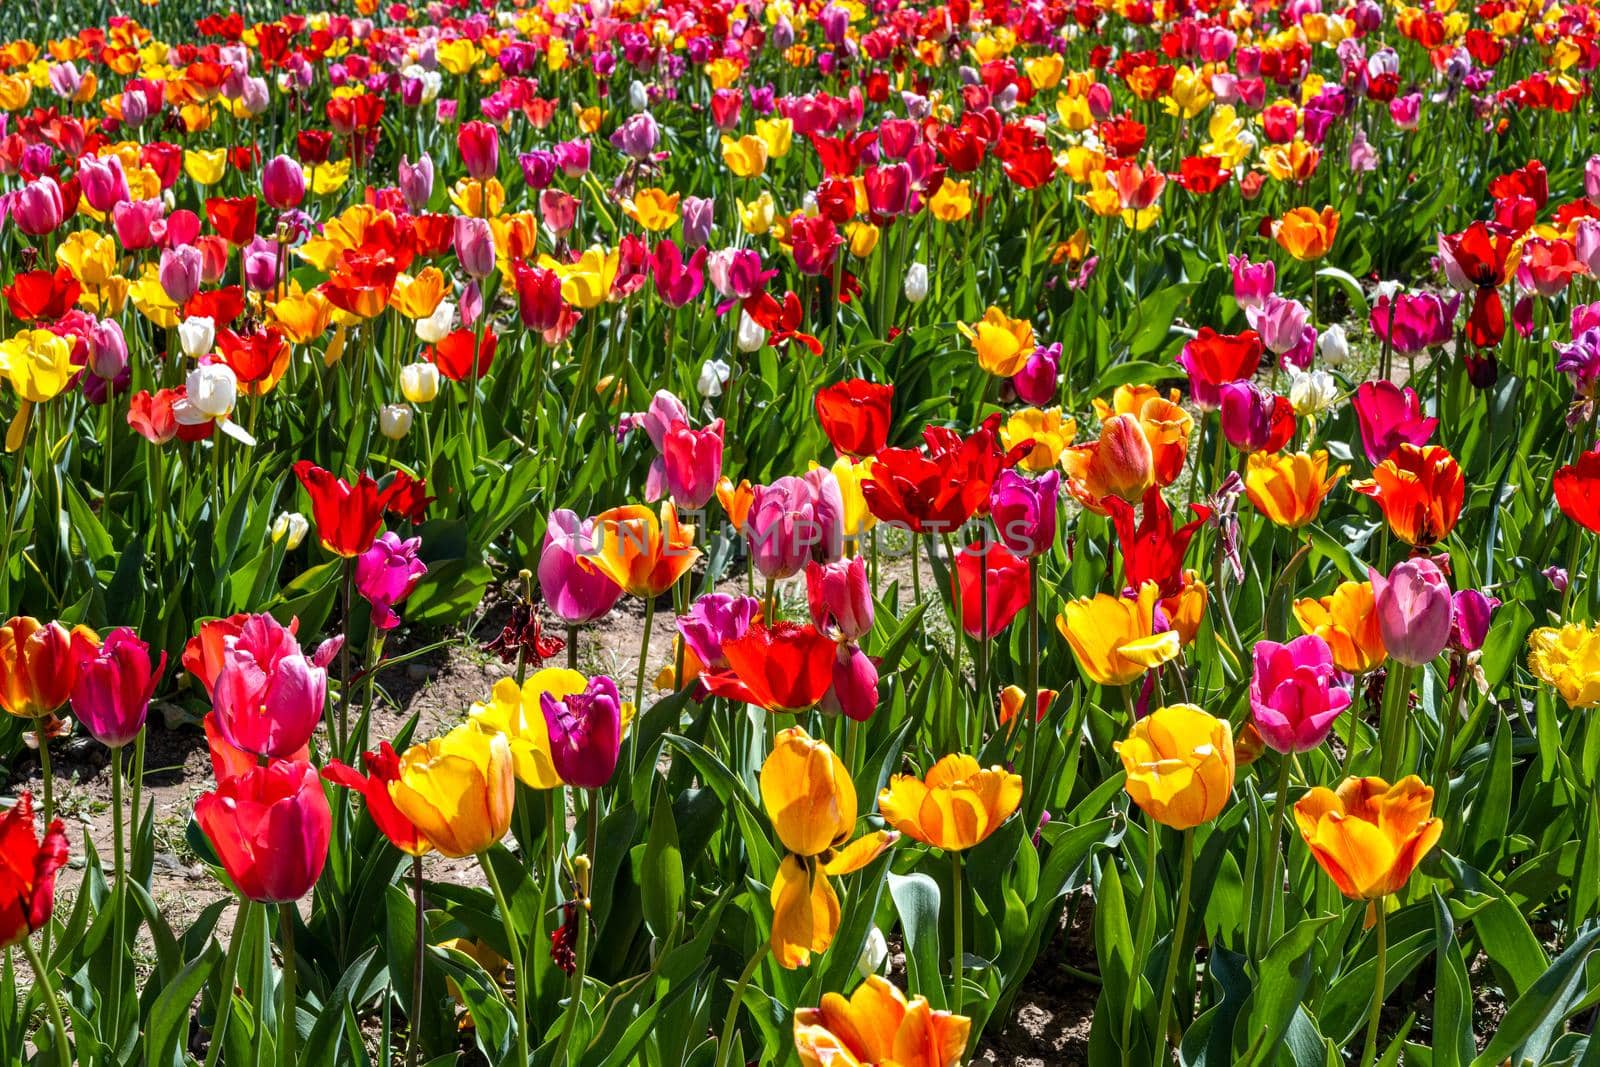 A field full of colorful blooming tulip flowers